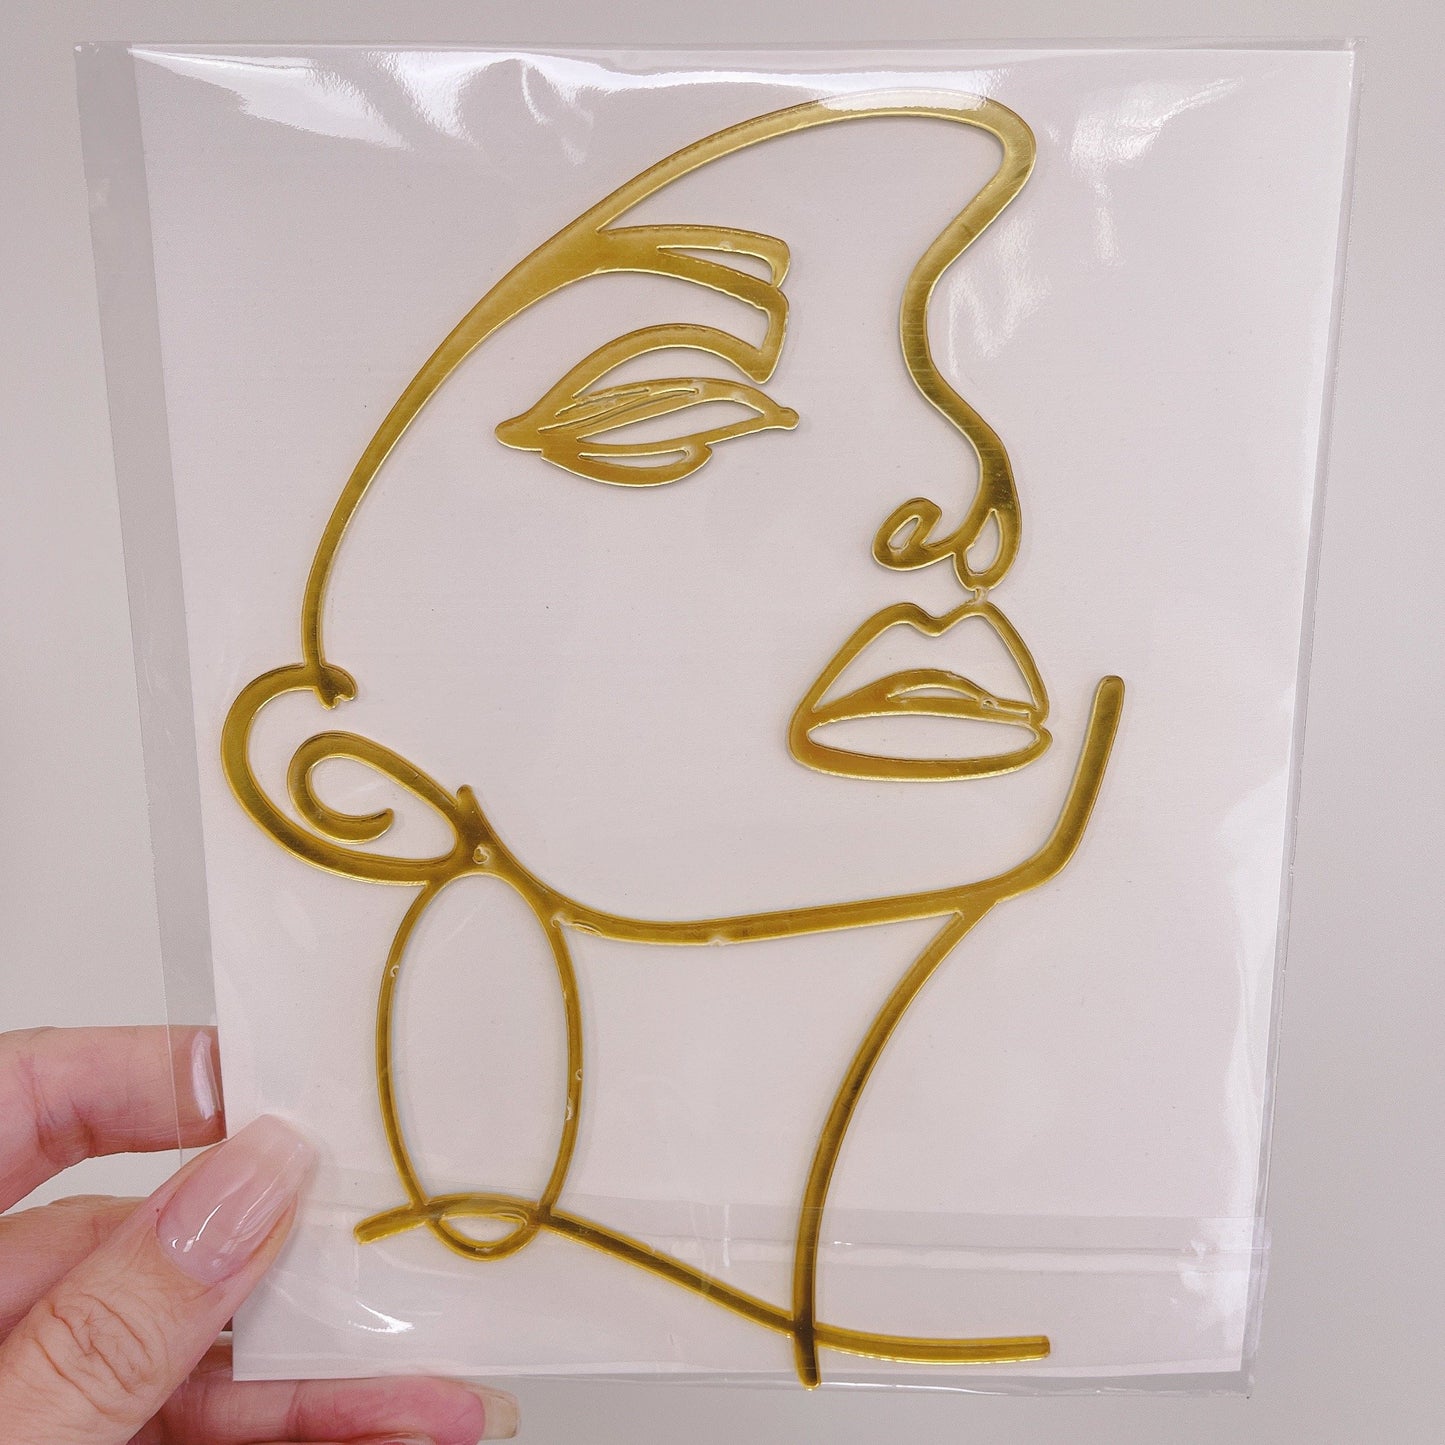 Back In Stock & Price Drop! Acrylic Gold or Black Abstract Lady Outline Cake Front Fopper